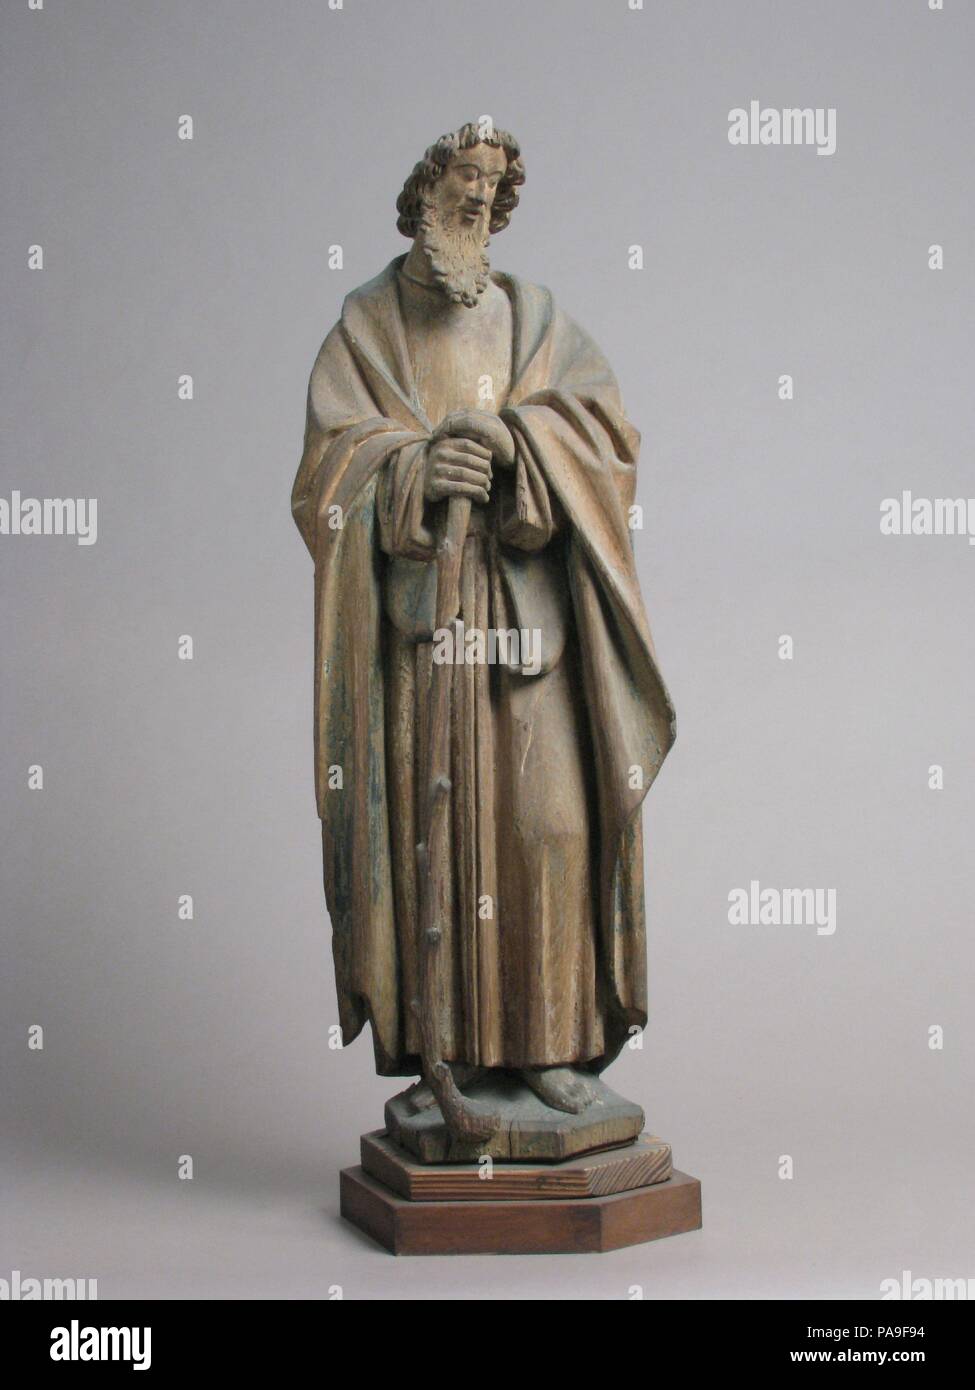 St. James the Less. Culture: North Netherlandish. Dimensions: Overall: 25 1/2 x 8 1/2 x 5 1/4in. (64.8 x 21.6 x 13.3cm)  without base: 23 7/8 x 8 1/4 x 5in. (60.6 x 21 x 12.7cm). Date: ca. 1500. Museum: Metropolitan Museum of Art, New York, USA. Stock Photo